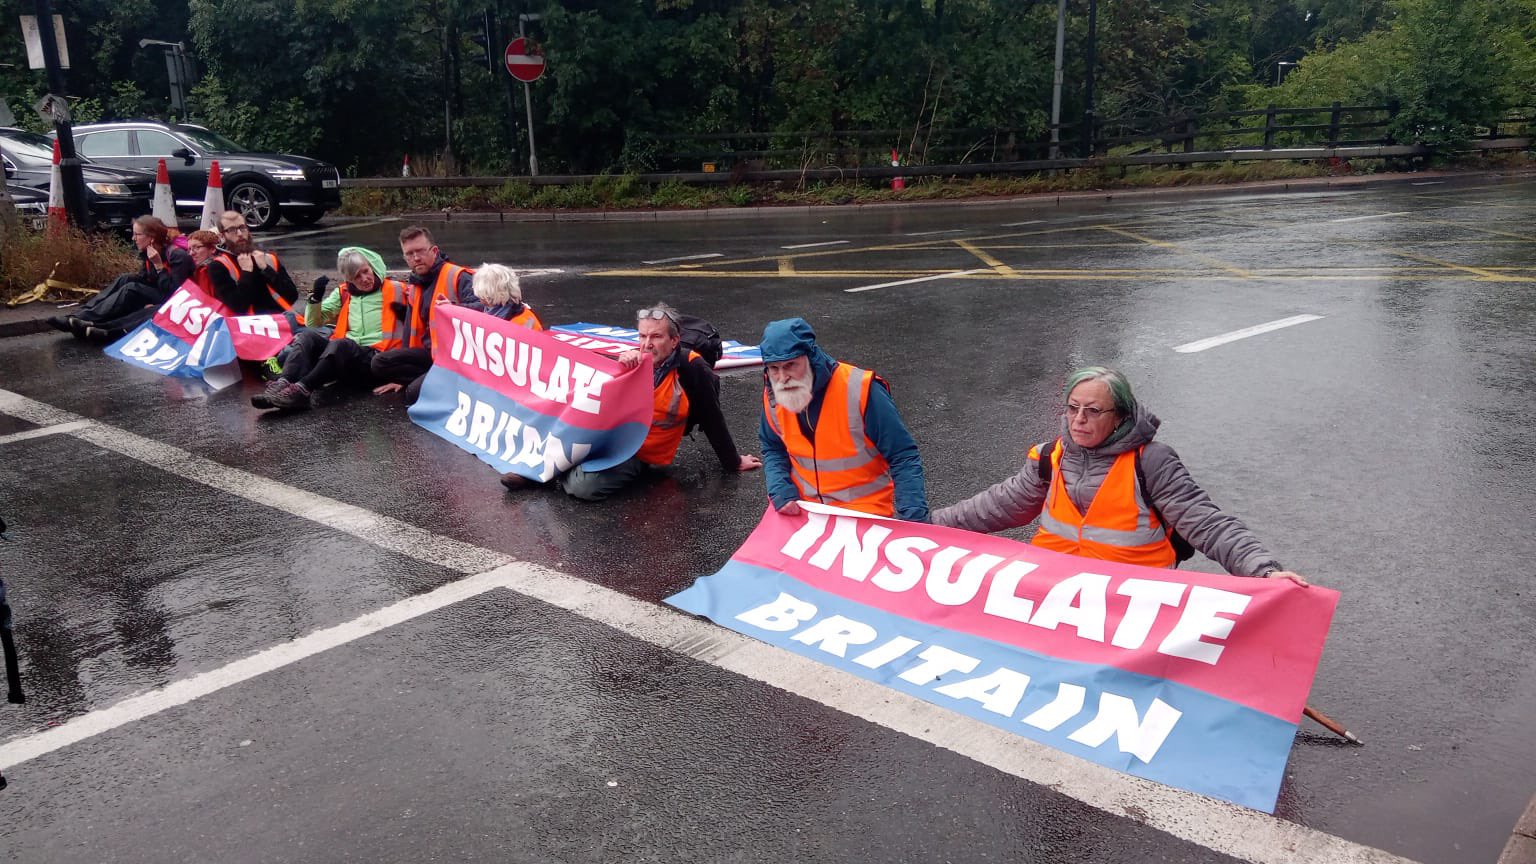 NEWS | Insulate Britain Protesters have blocked sections of the M1 & M4 this morning